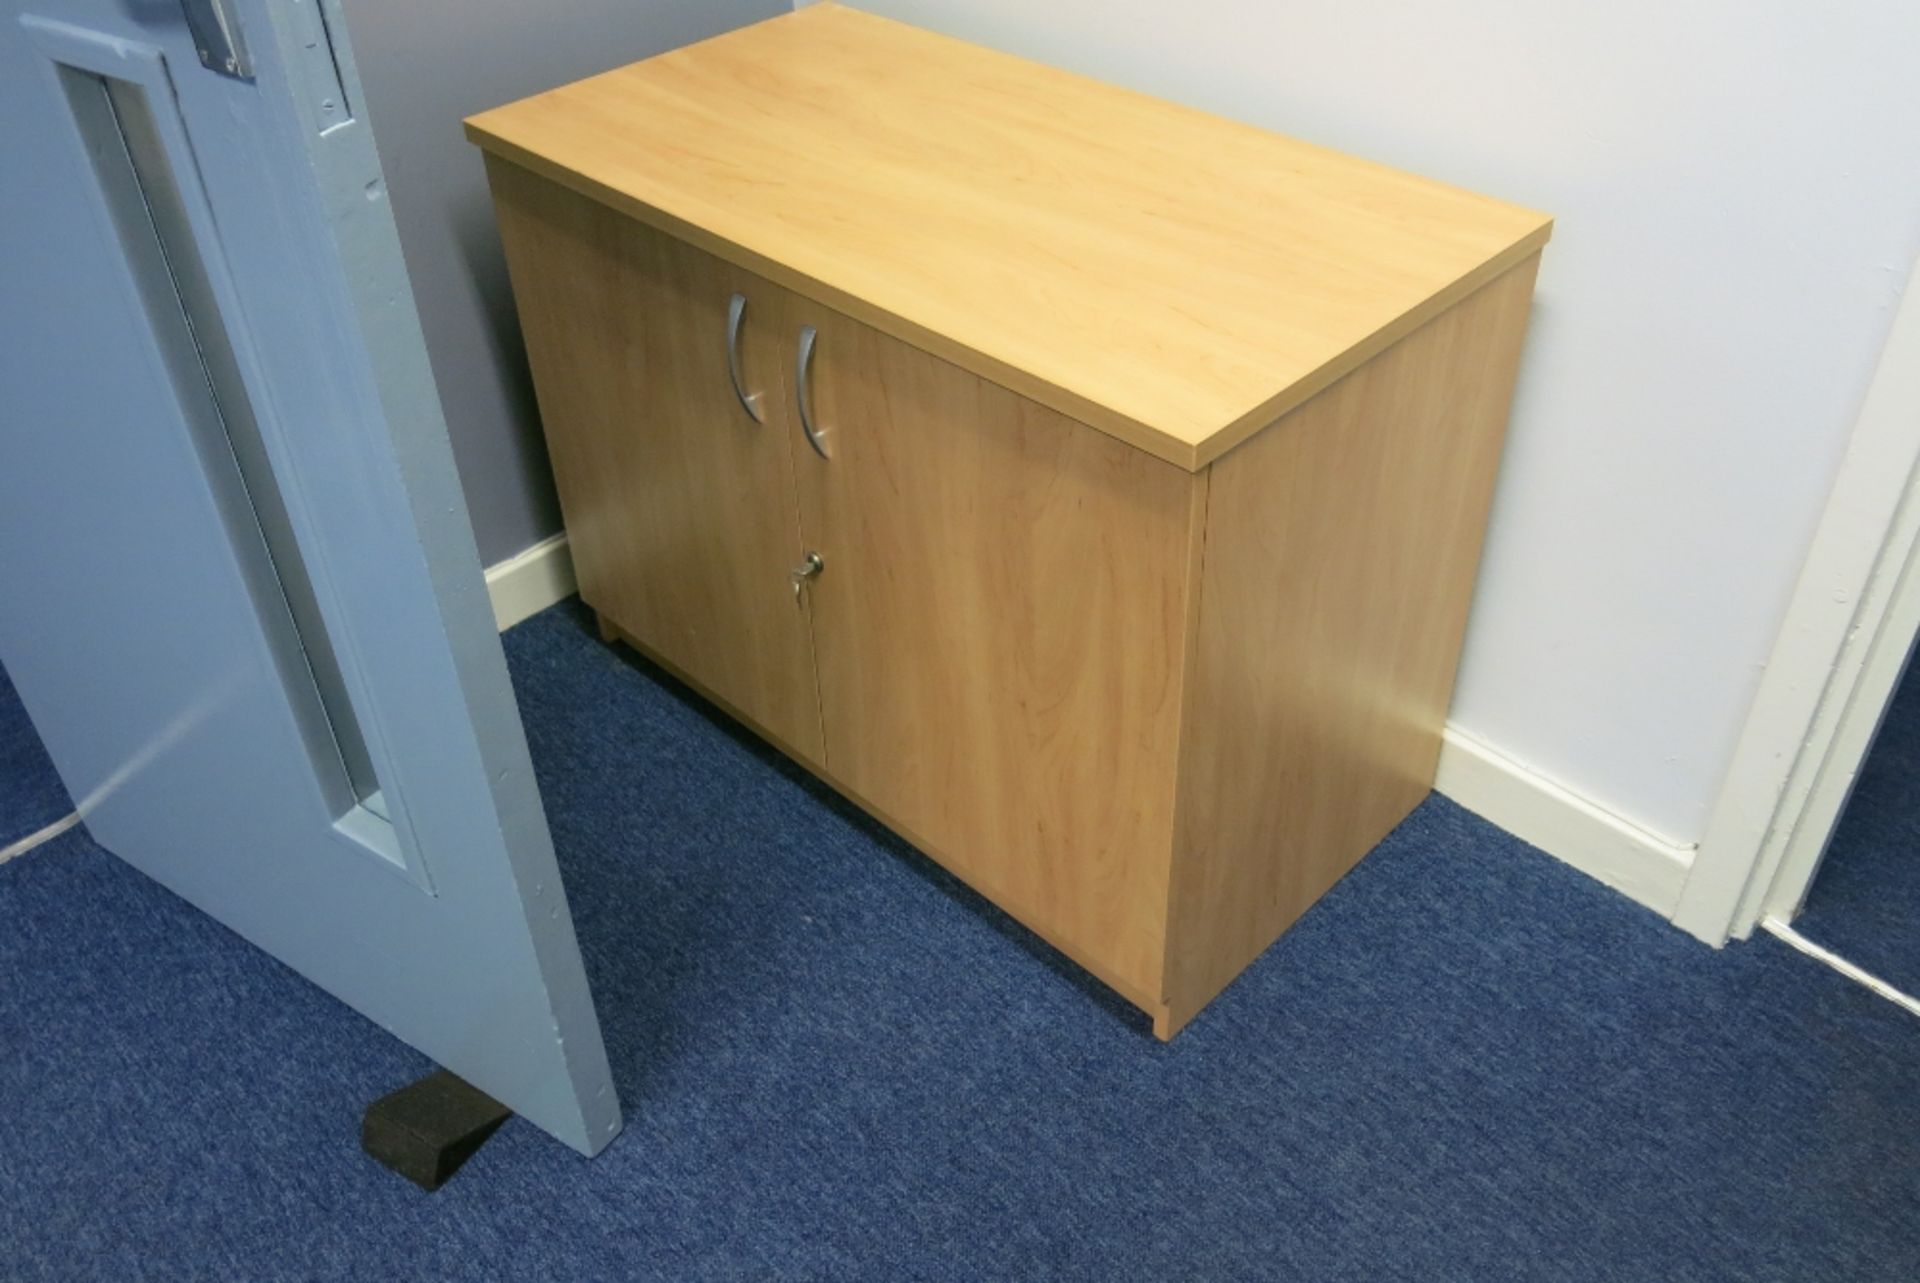 Contents Of Meeting Room in Unit 3 - Image 4 of 4